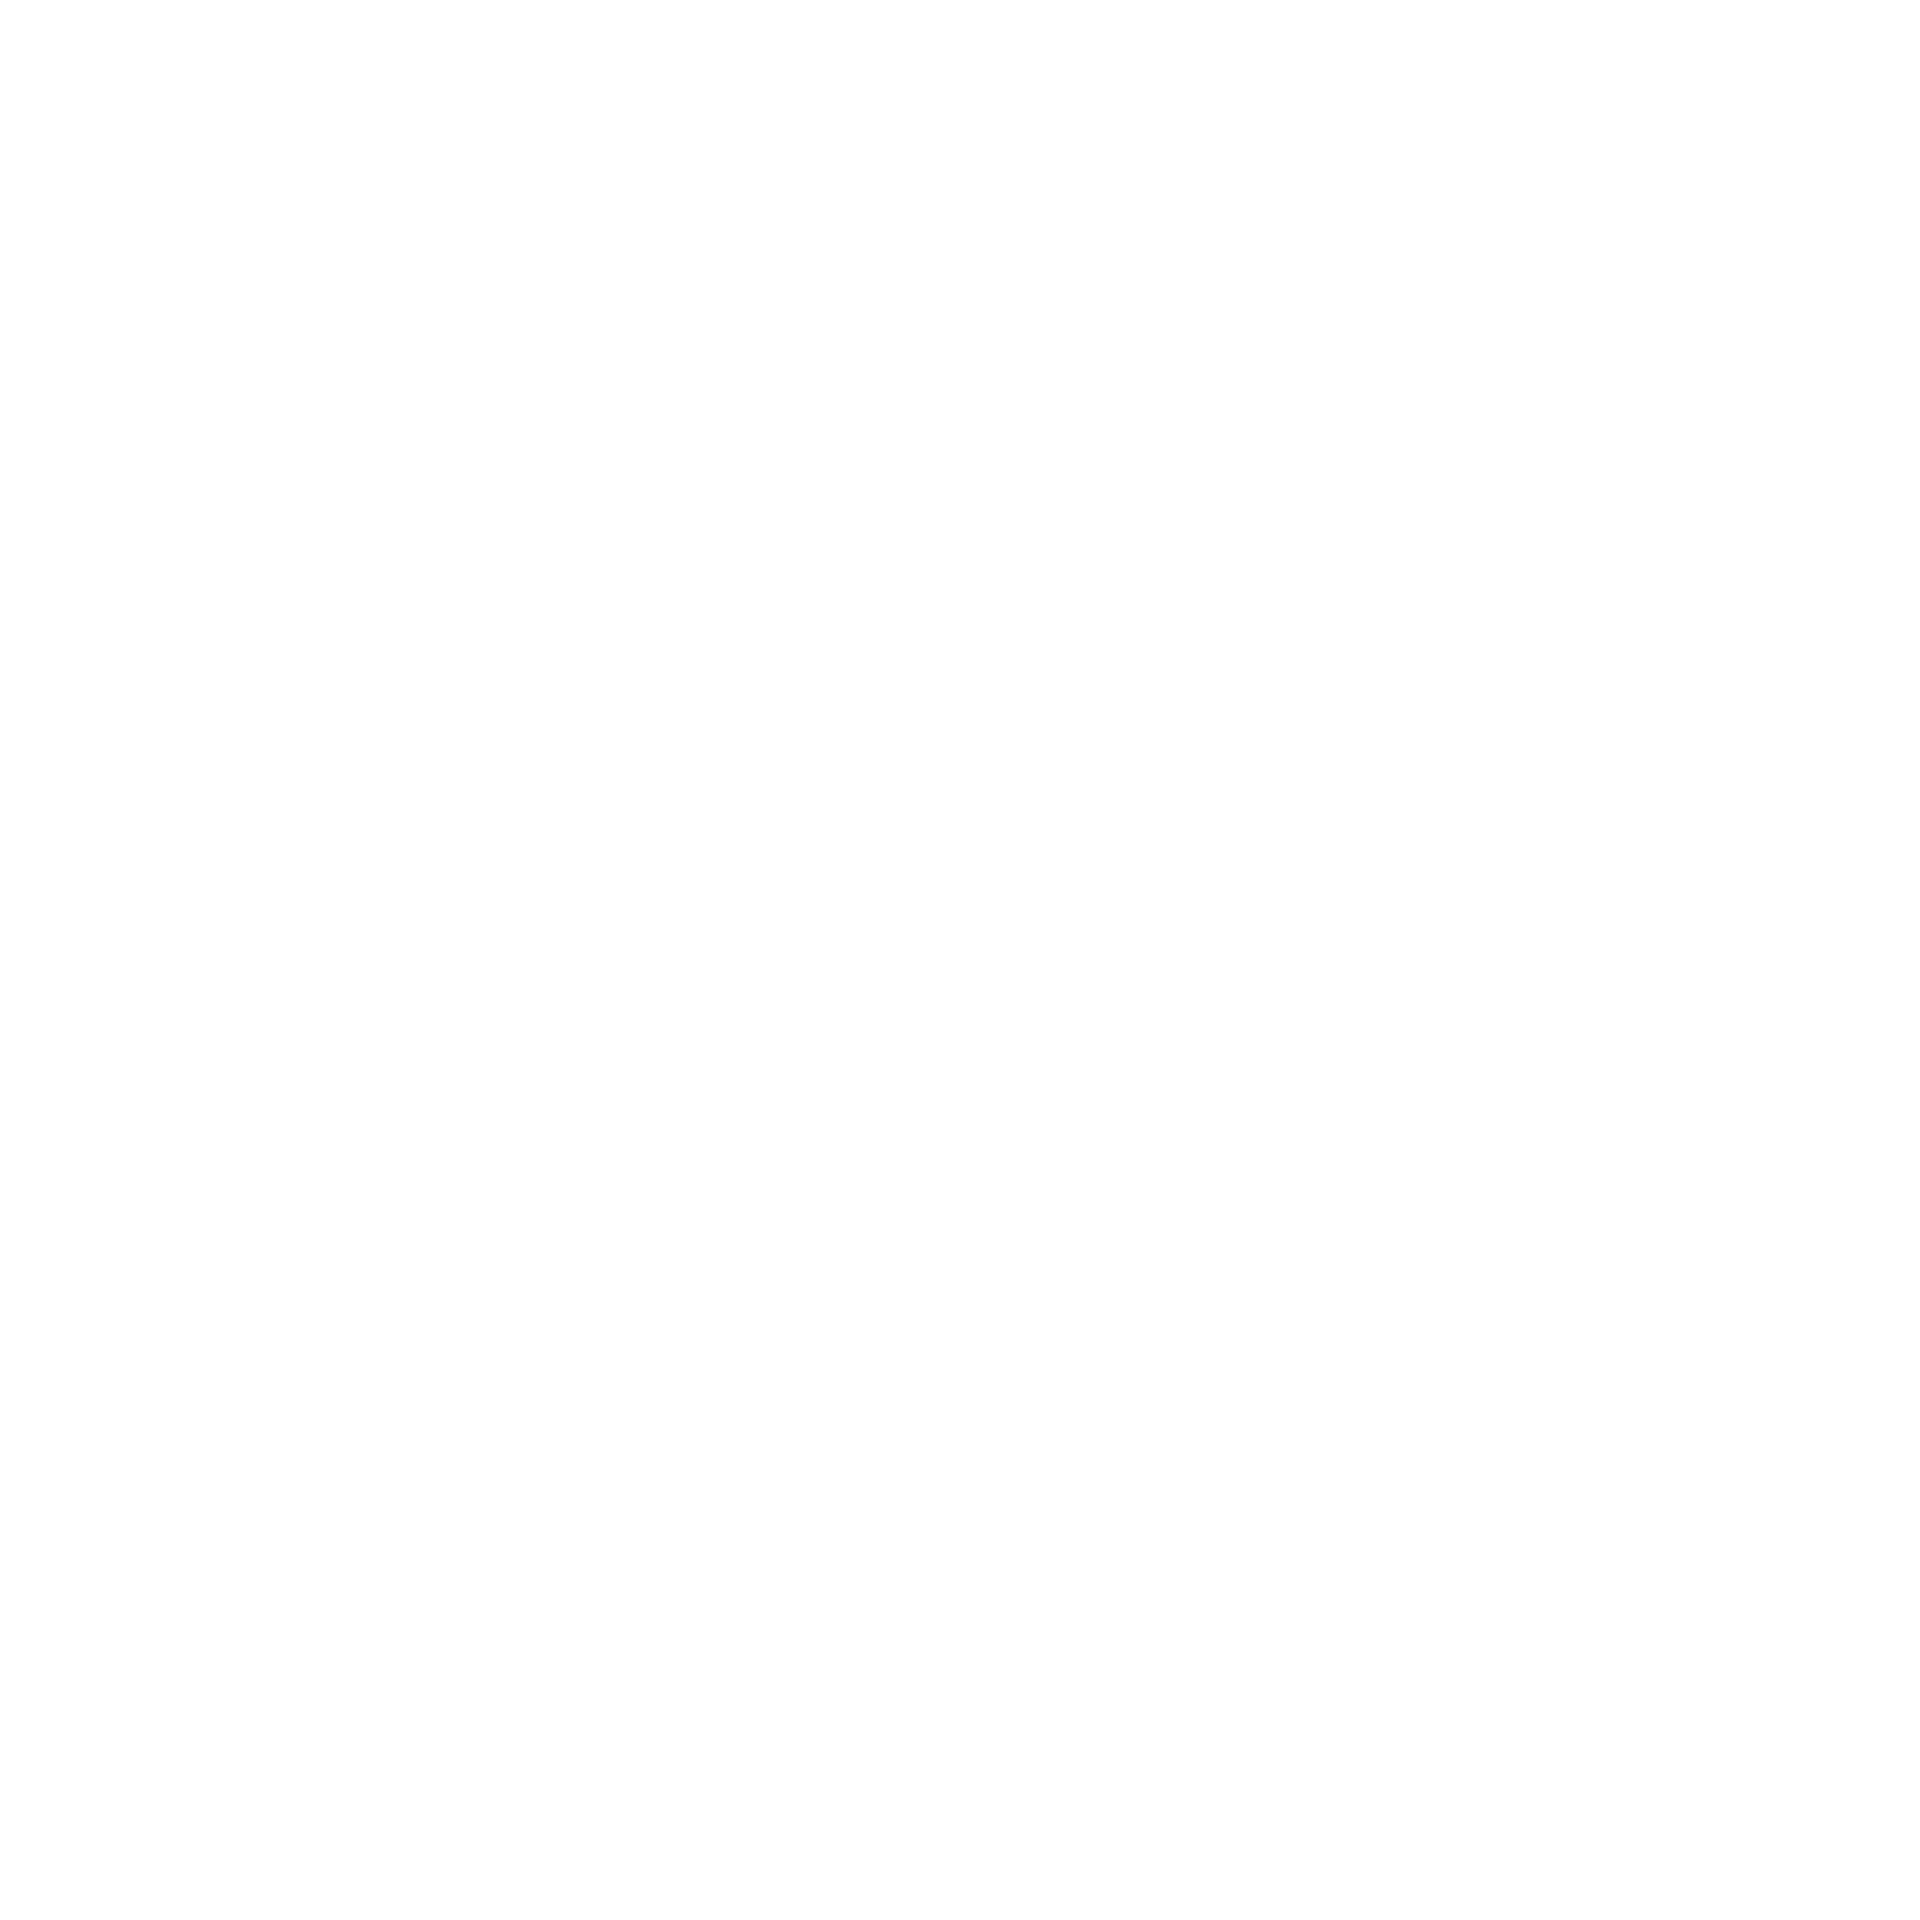 a logo for heritage floor coatings